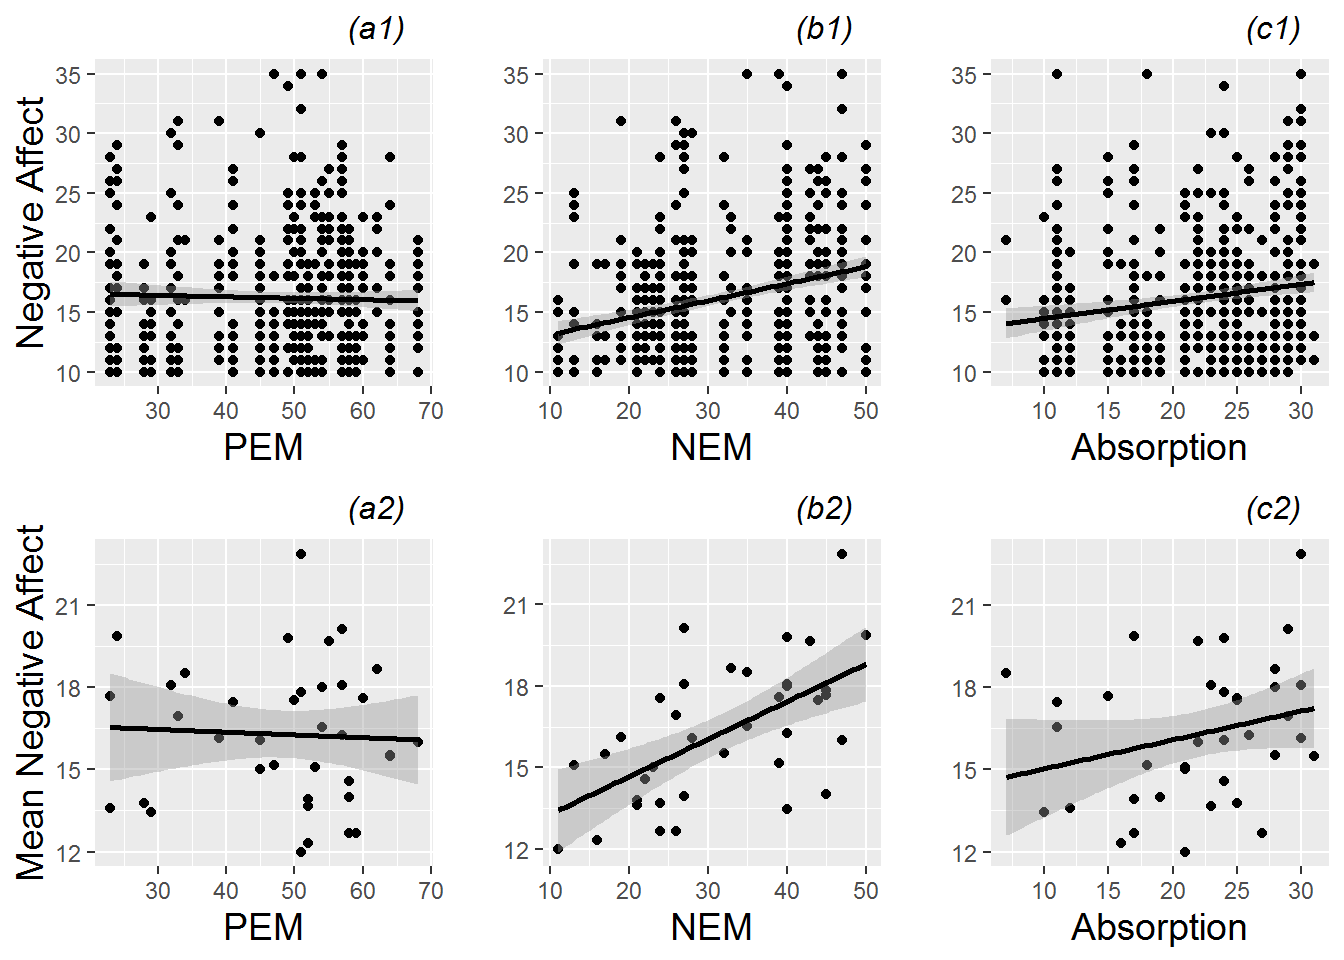  Scatterplots of continuous Level Two covariates (positive emotionality (PEM), negative emotionality (NEM), and absorption) vs. model response (negative affect).  The top plots (a1, b1, c1) are based on all 497 observations from all 37 subjects, while the bottom plots (a2, b2, c2) use only one observation per subject.